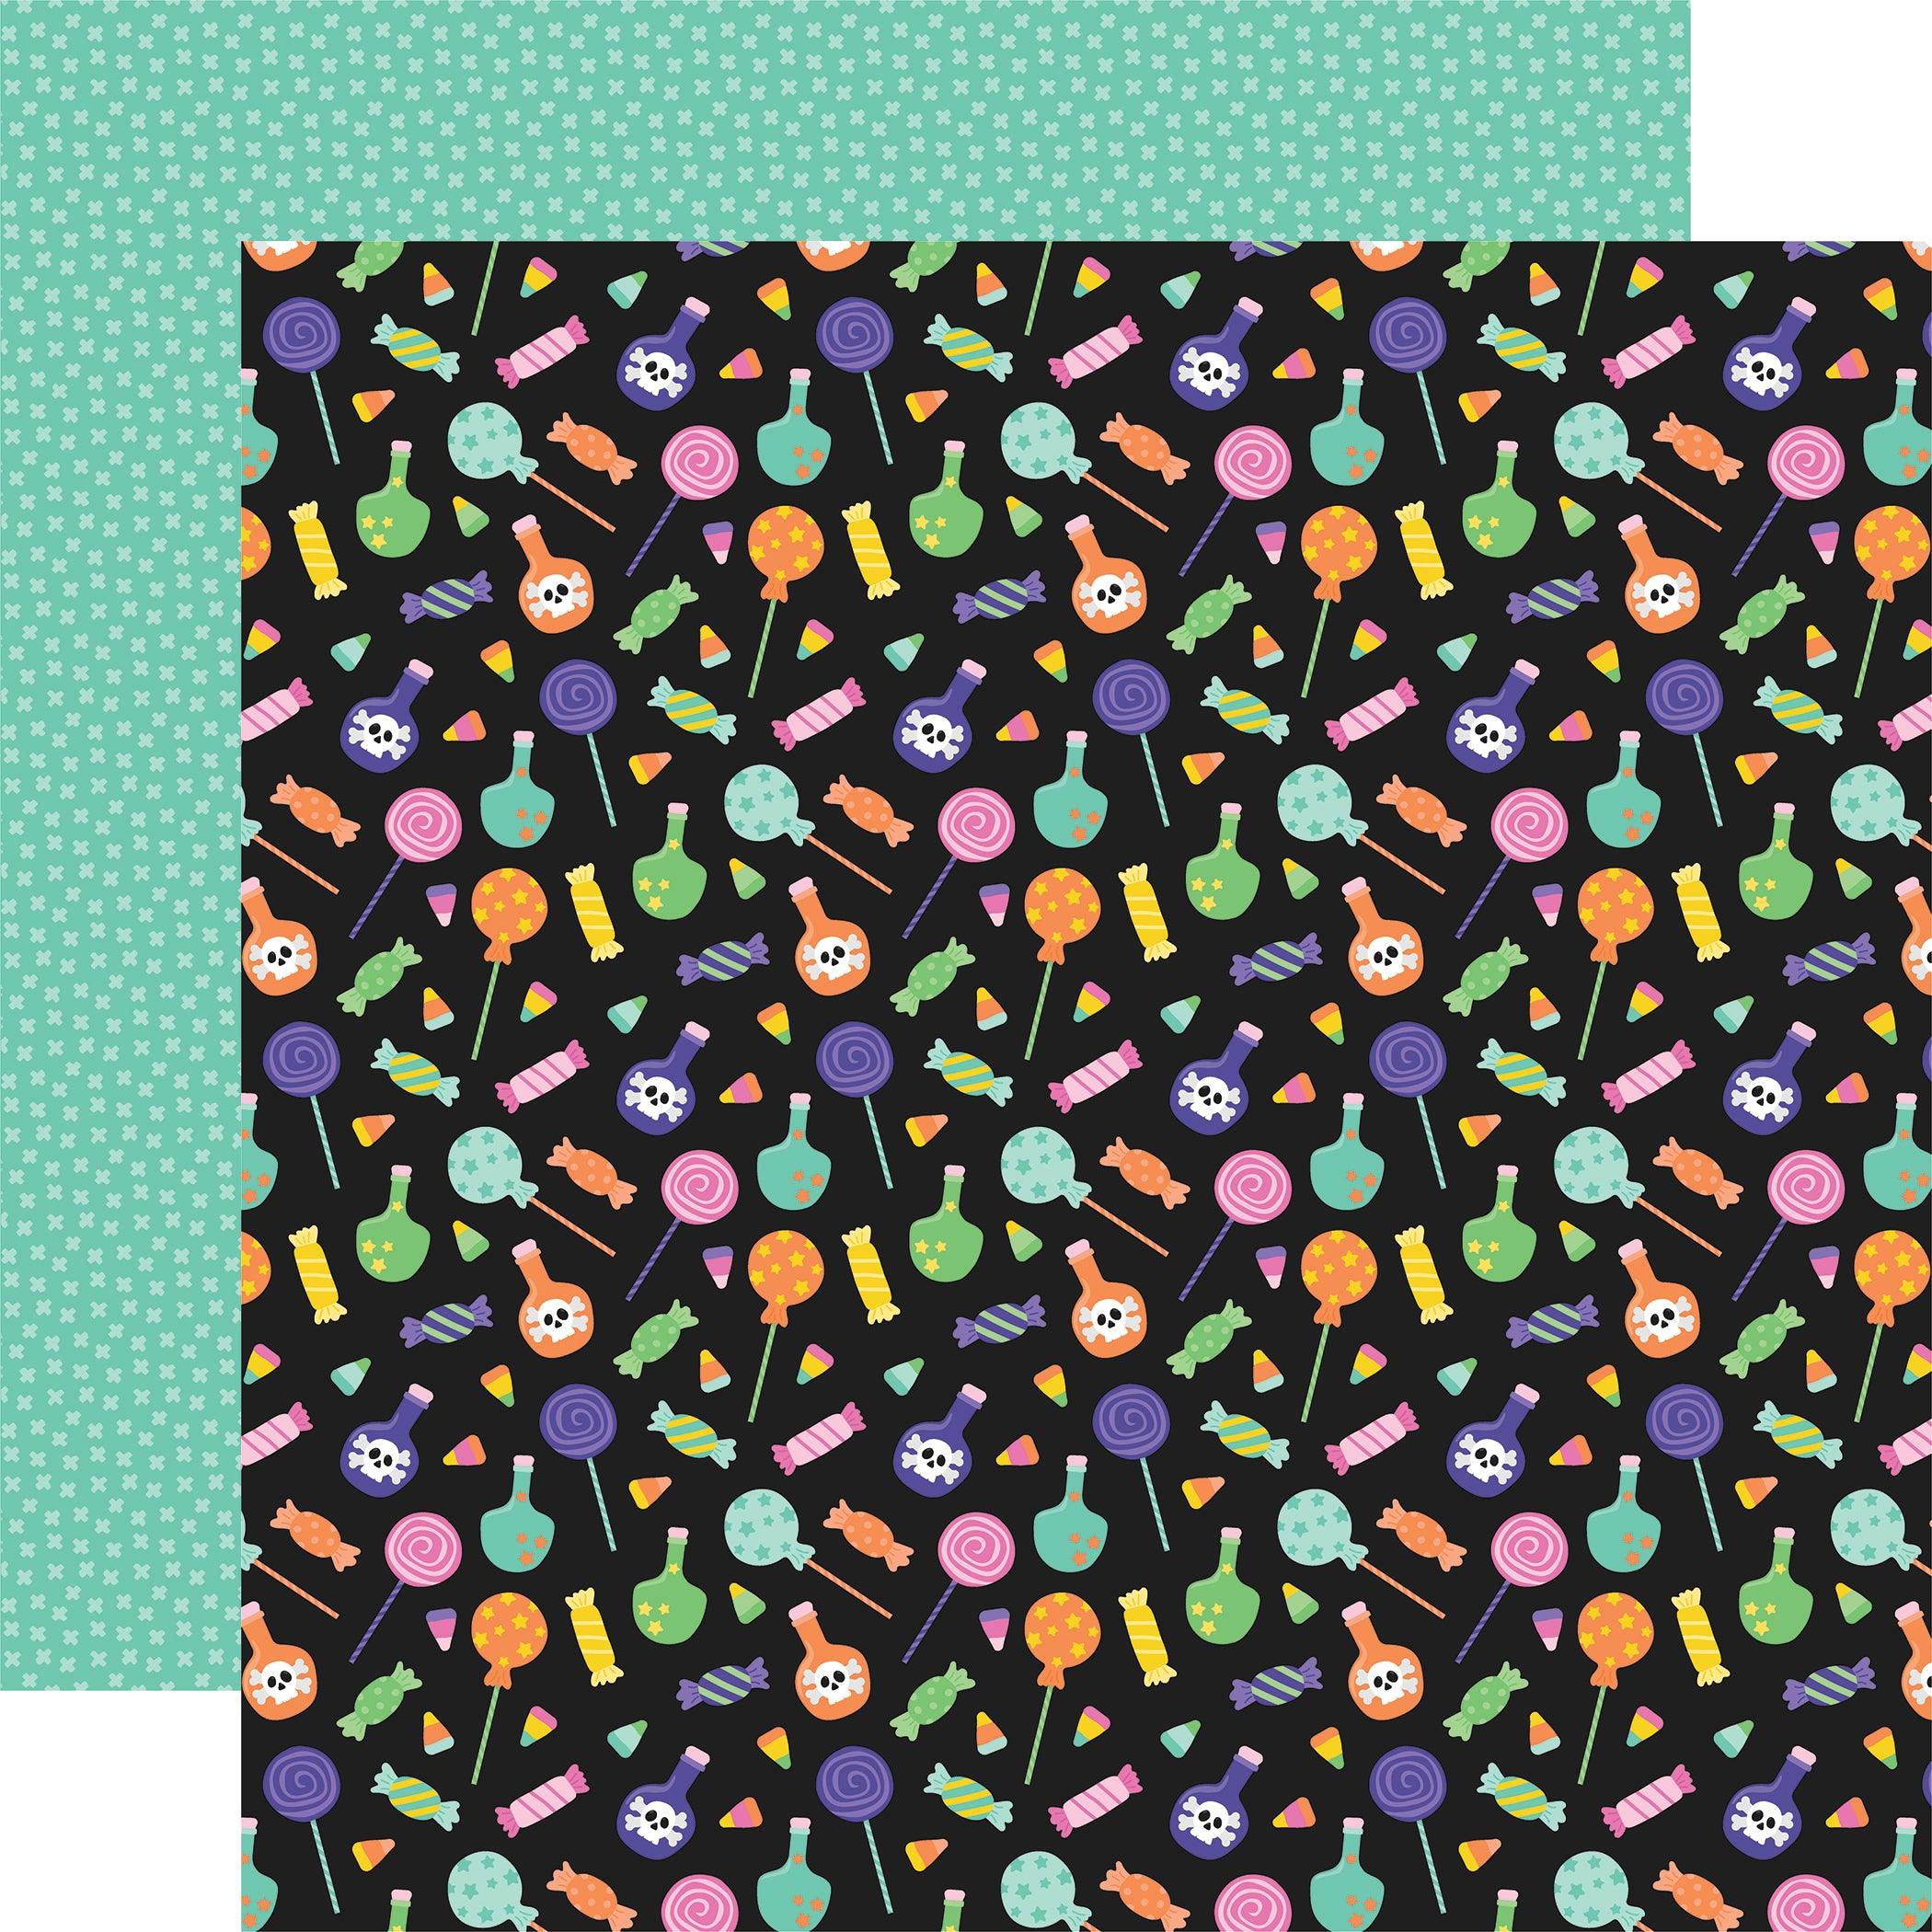 Monster Mash Collection Candy Haul 12 x 12 Double-Sided Scrapbook Paper by Echo Park Paper - Scrapbook Supply Companies